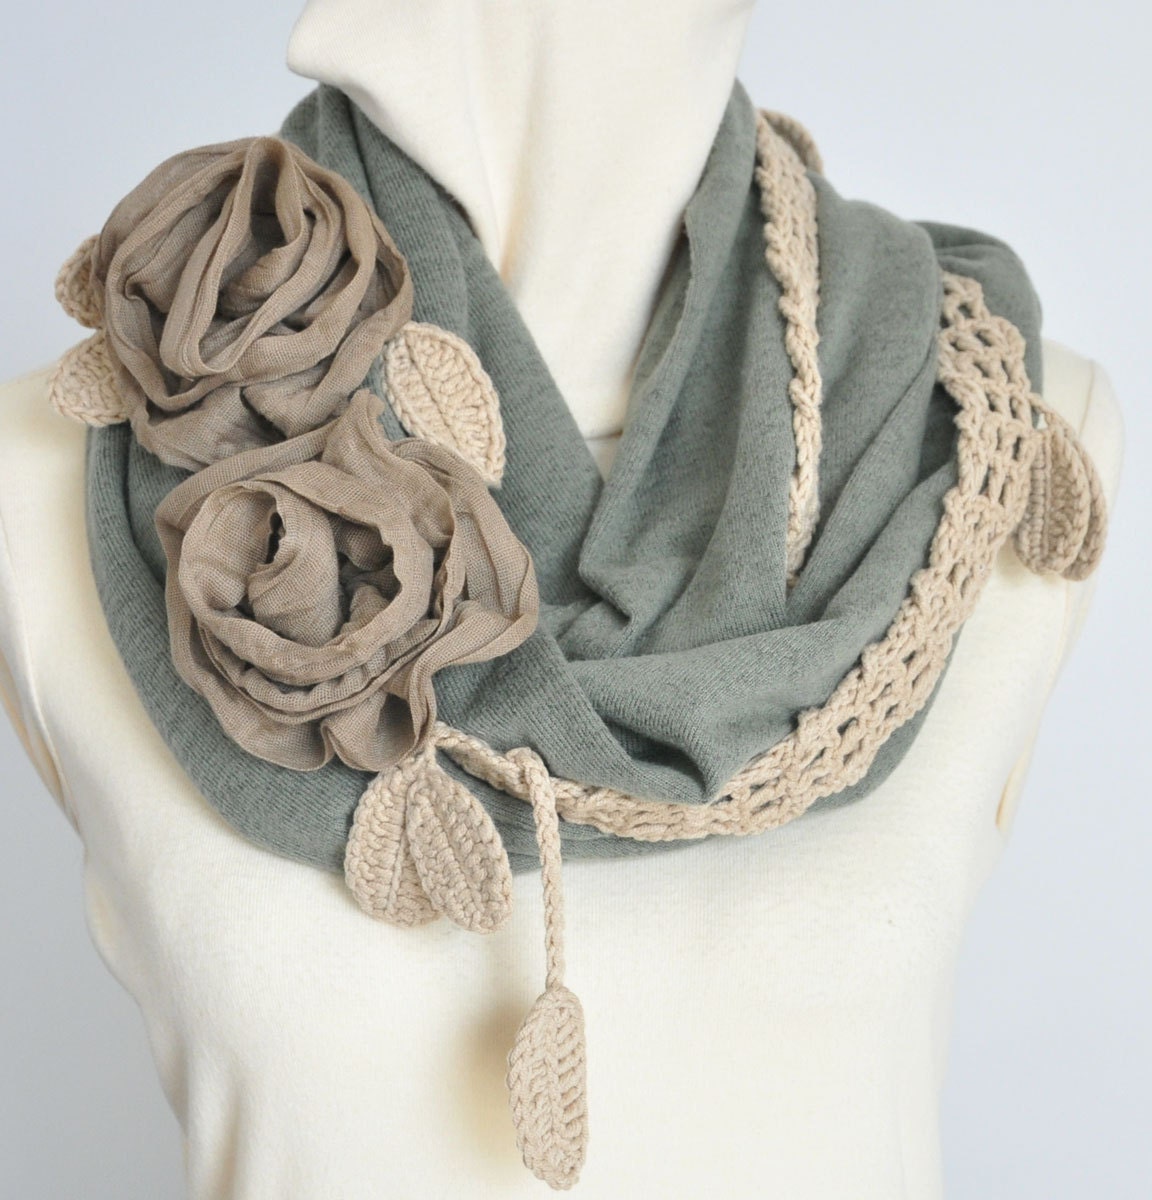 FLORAL JERSY - Green - Crochet Lace and Jersy Tube Scarf/ Shawl/Shrug